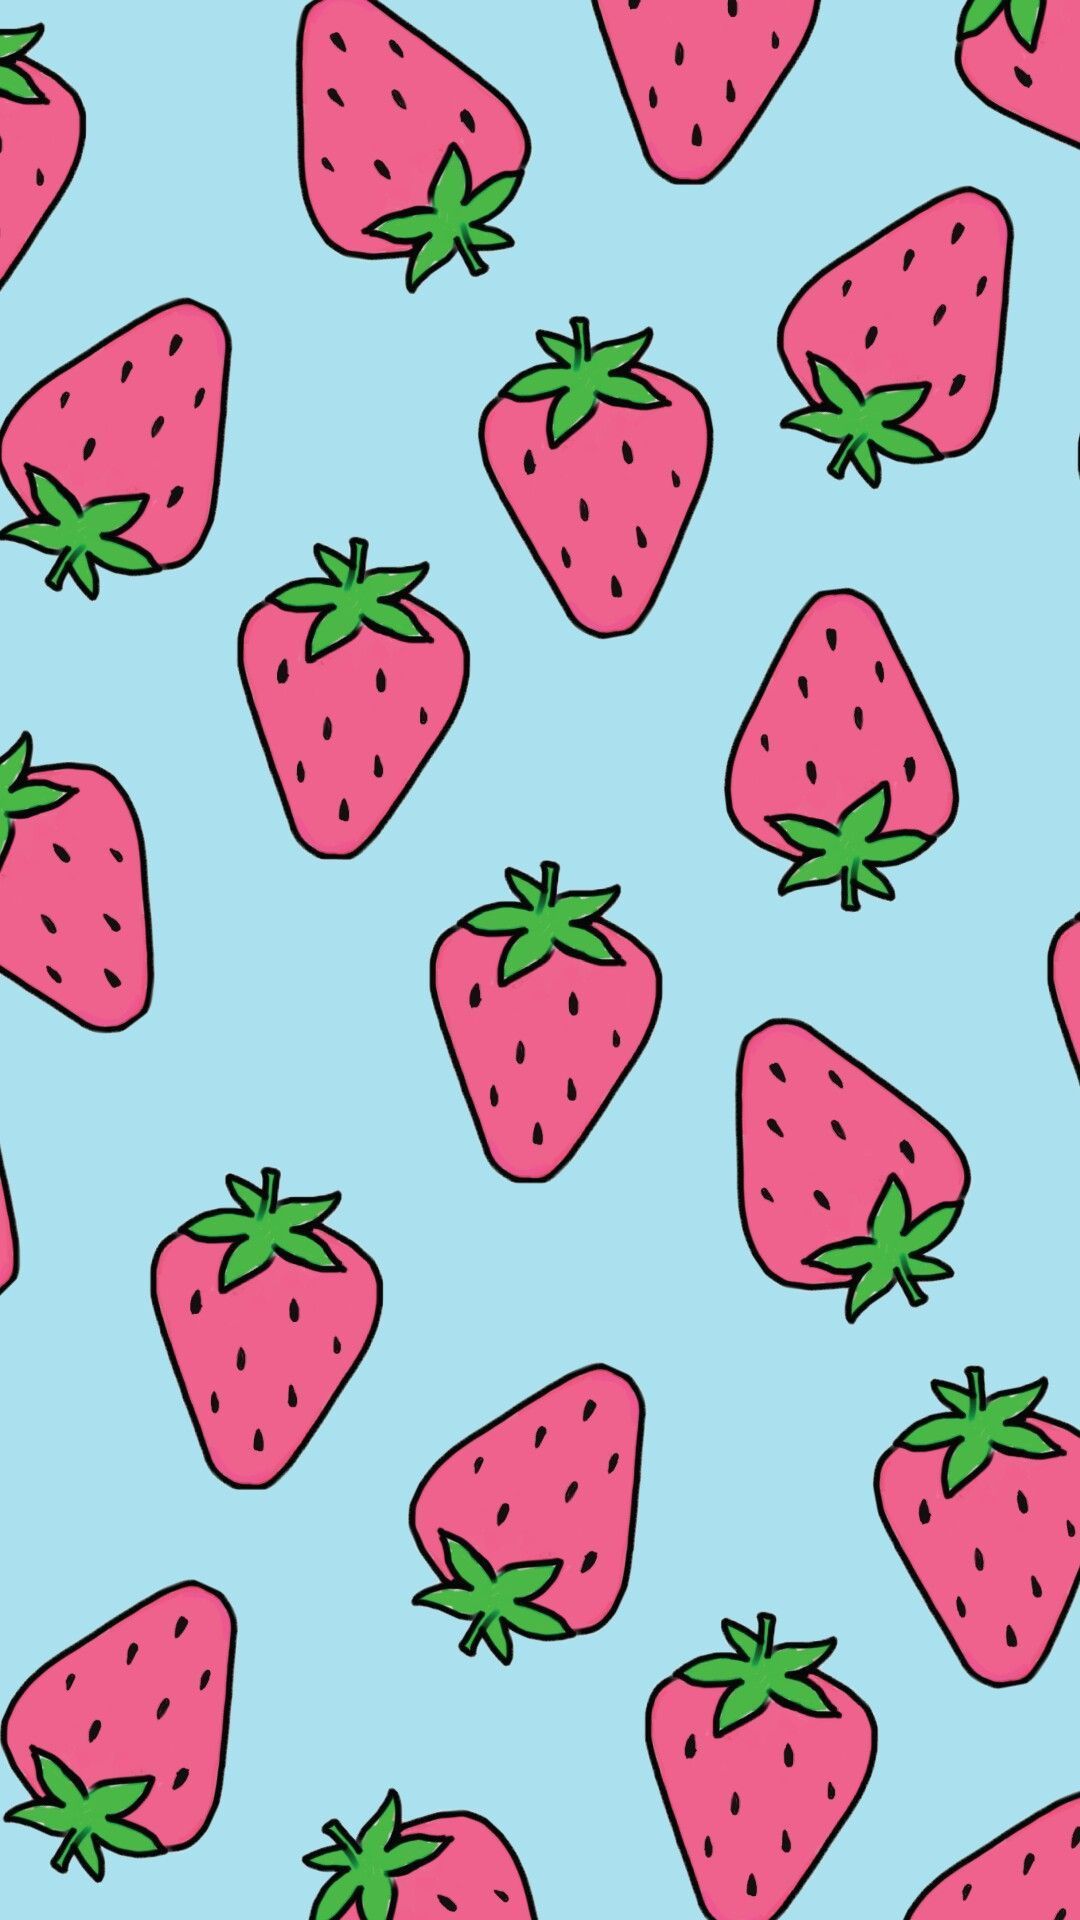 Cute Strawberry iPhone Wallpaper Free Cute Strawberry iPhone Background